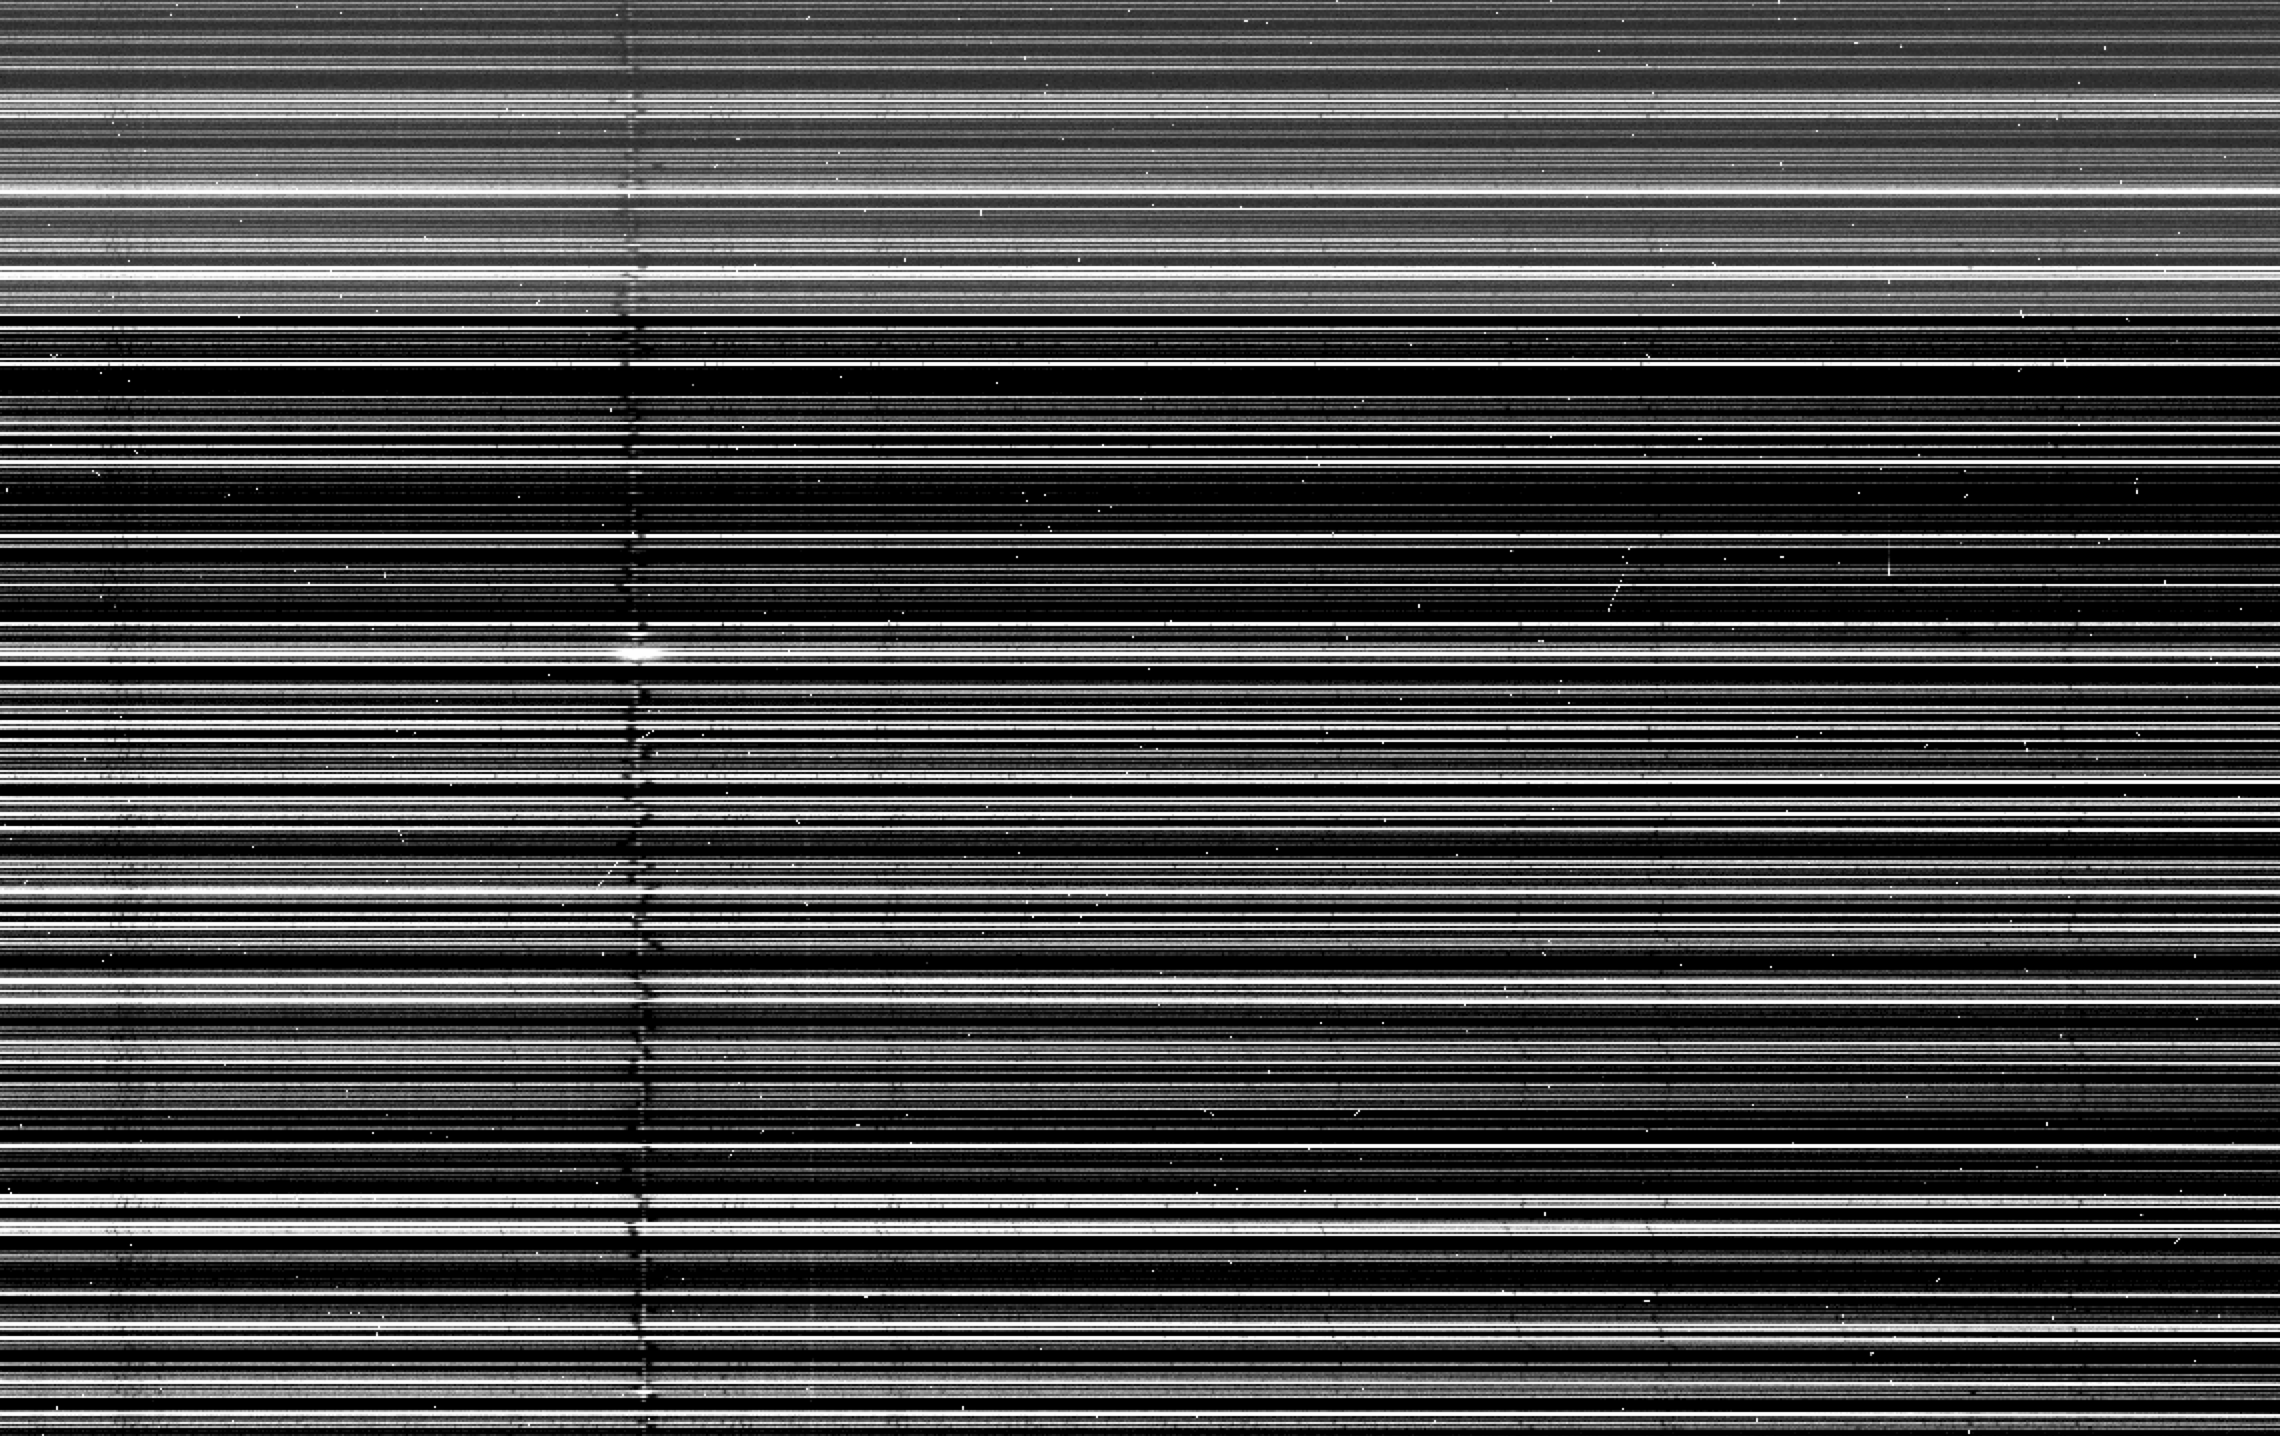 This picture shows a part of the CCD Camera image of the 3rd HERMES detector. Spectra per star go horizontally with a greyscale indicating the number of photons/electrons counted. Absorption lines, like the strong Halpha line in the left third of each spectrum are dark black lines and are wiggling from star to star due to their motion away from us or towards us.